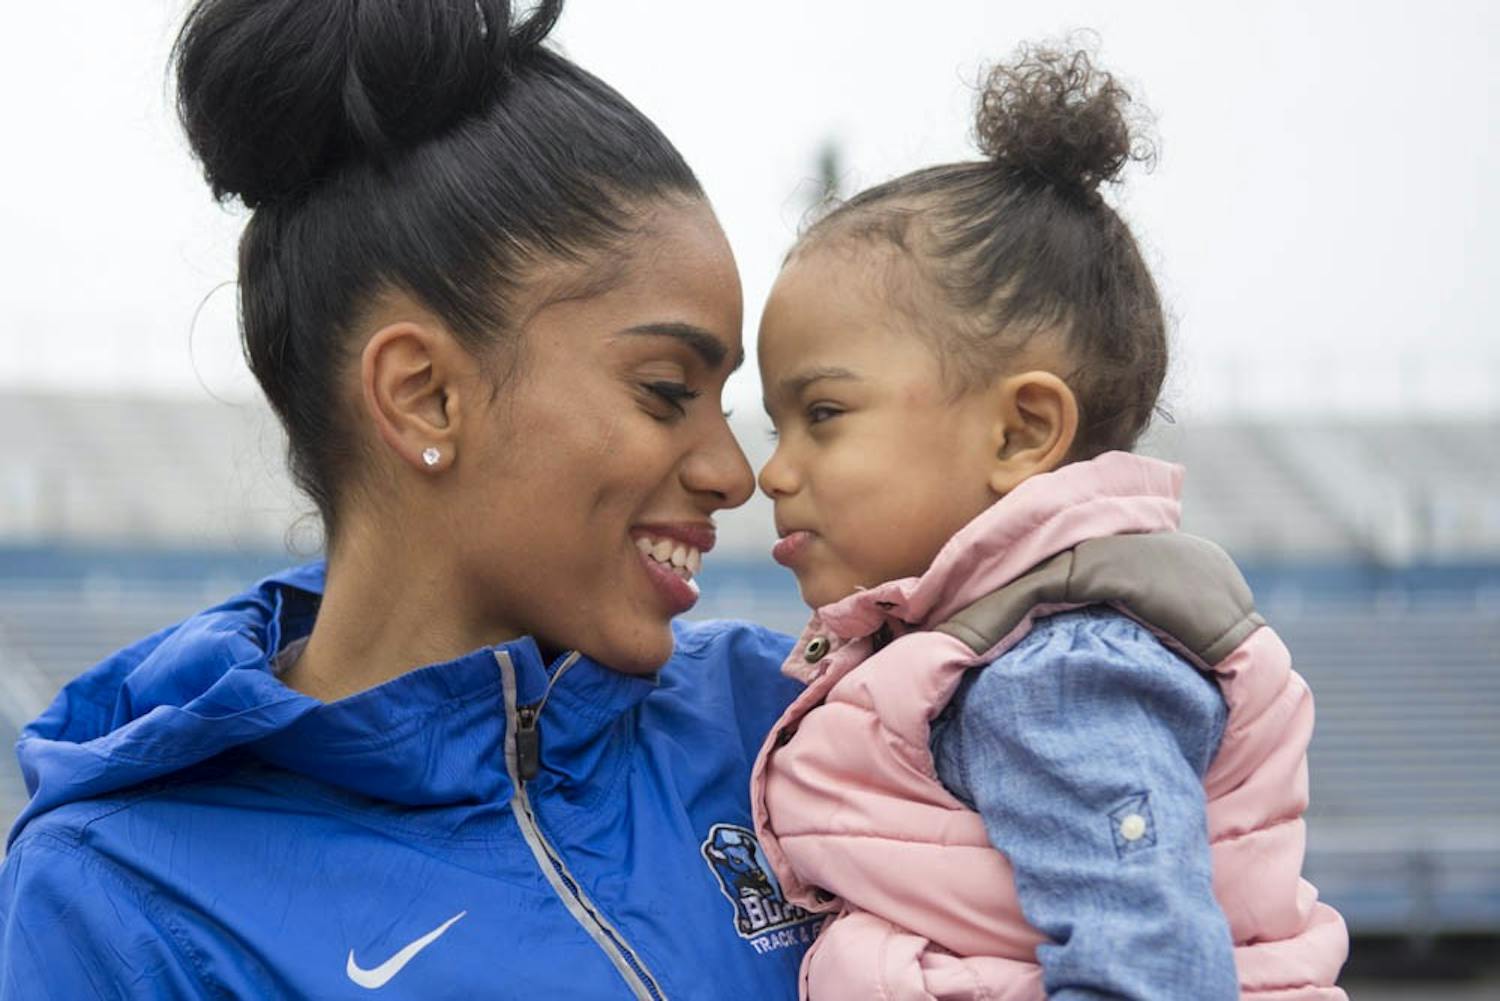 Asher Beasley, a hurdler on the women's track and field team, gave birth to her daughter Jace on May 9, 2014. Since then, she has come back to UB even stronger.